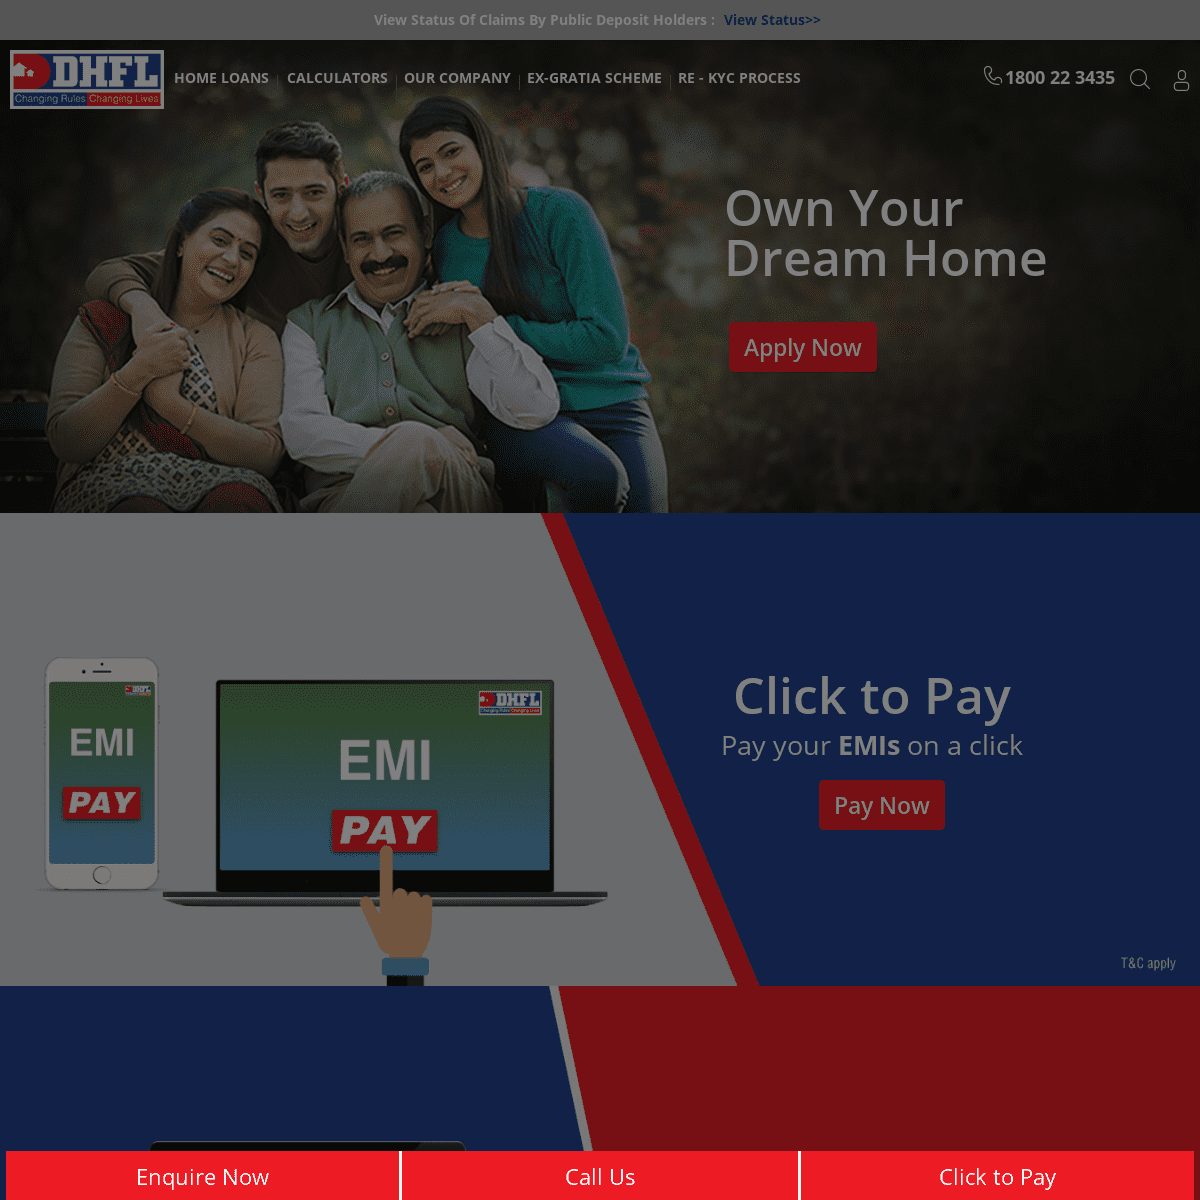 A complete backup of https://dhfl.com